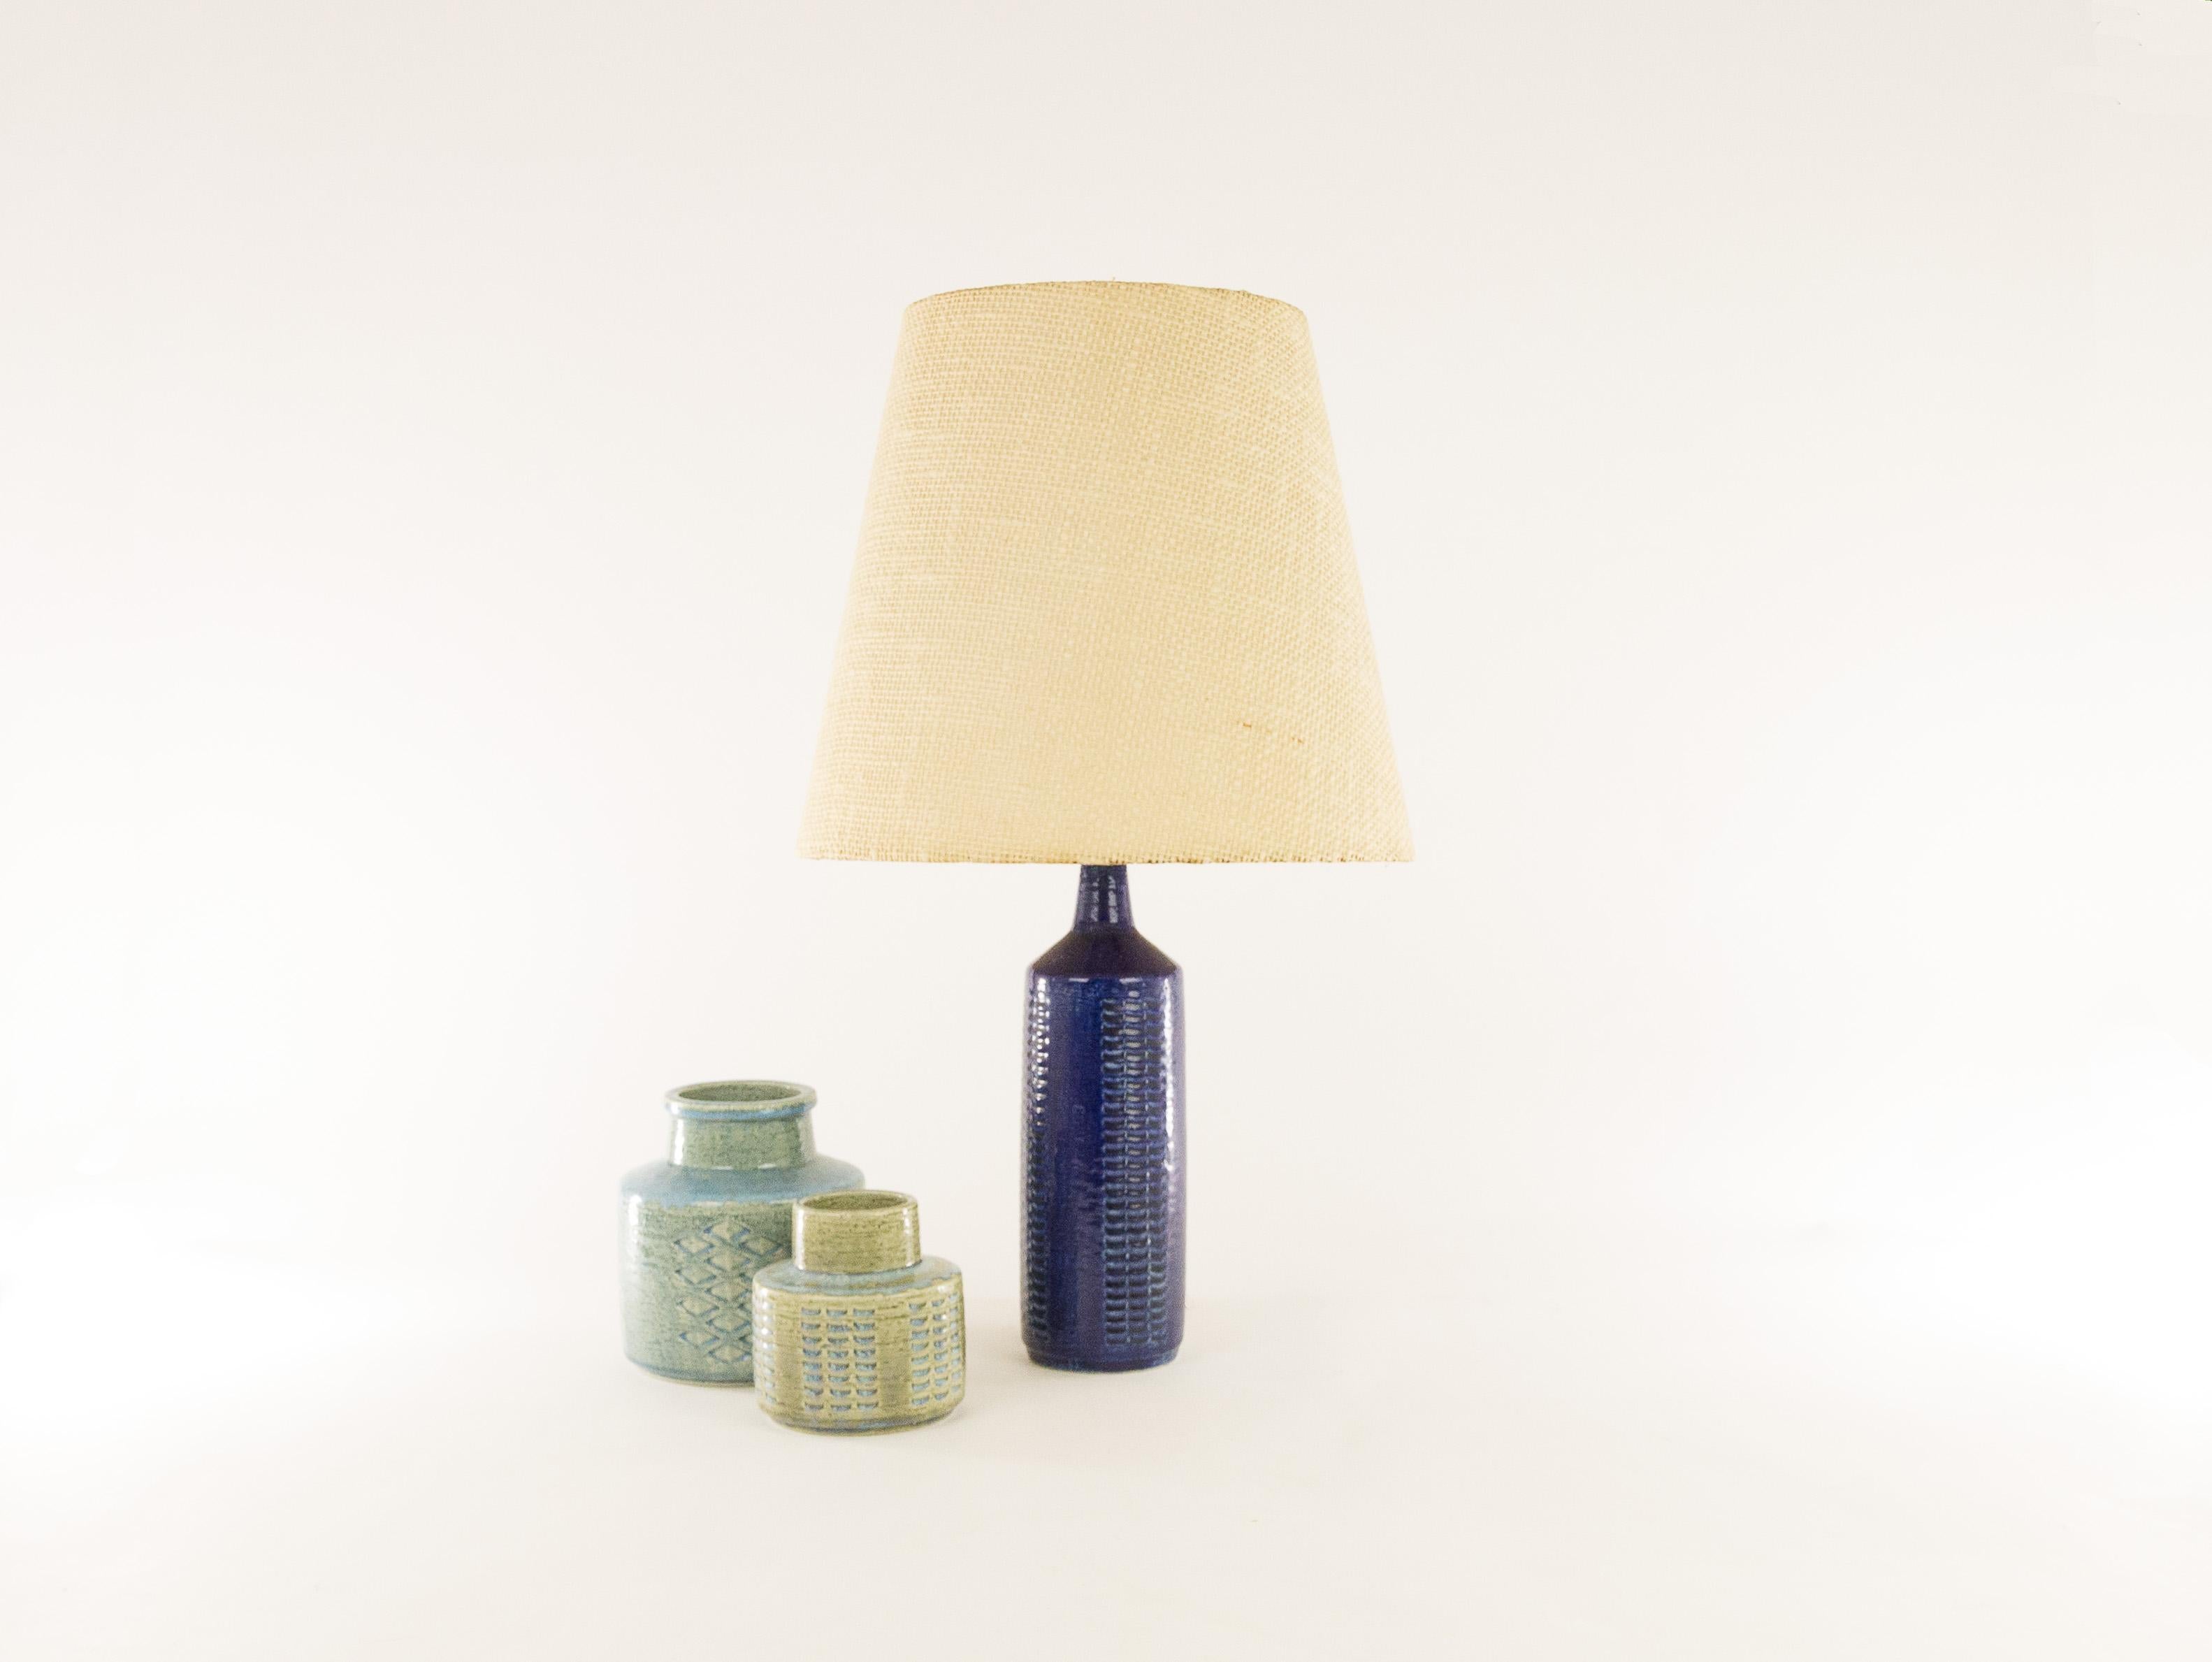 A DL/27 table lamp made by Annelise and Per Linnemann-Schmidt for Palshus in the 1960s. The colour of this piece is cobalt blue.

The lamp comes with its original lampshade holder. The lampshade shown and the pots are for display purposes only and